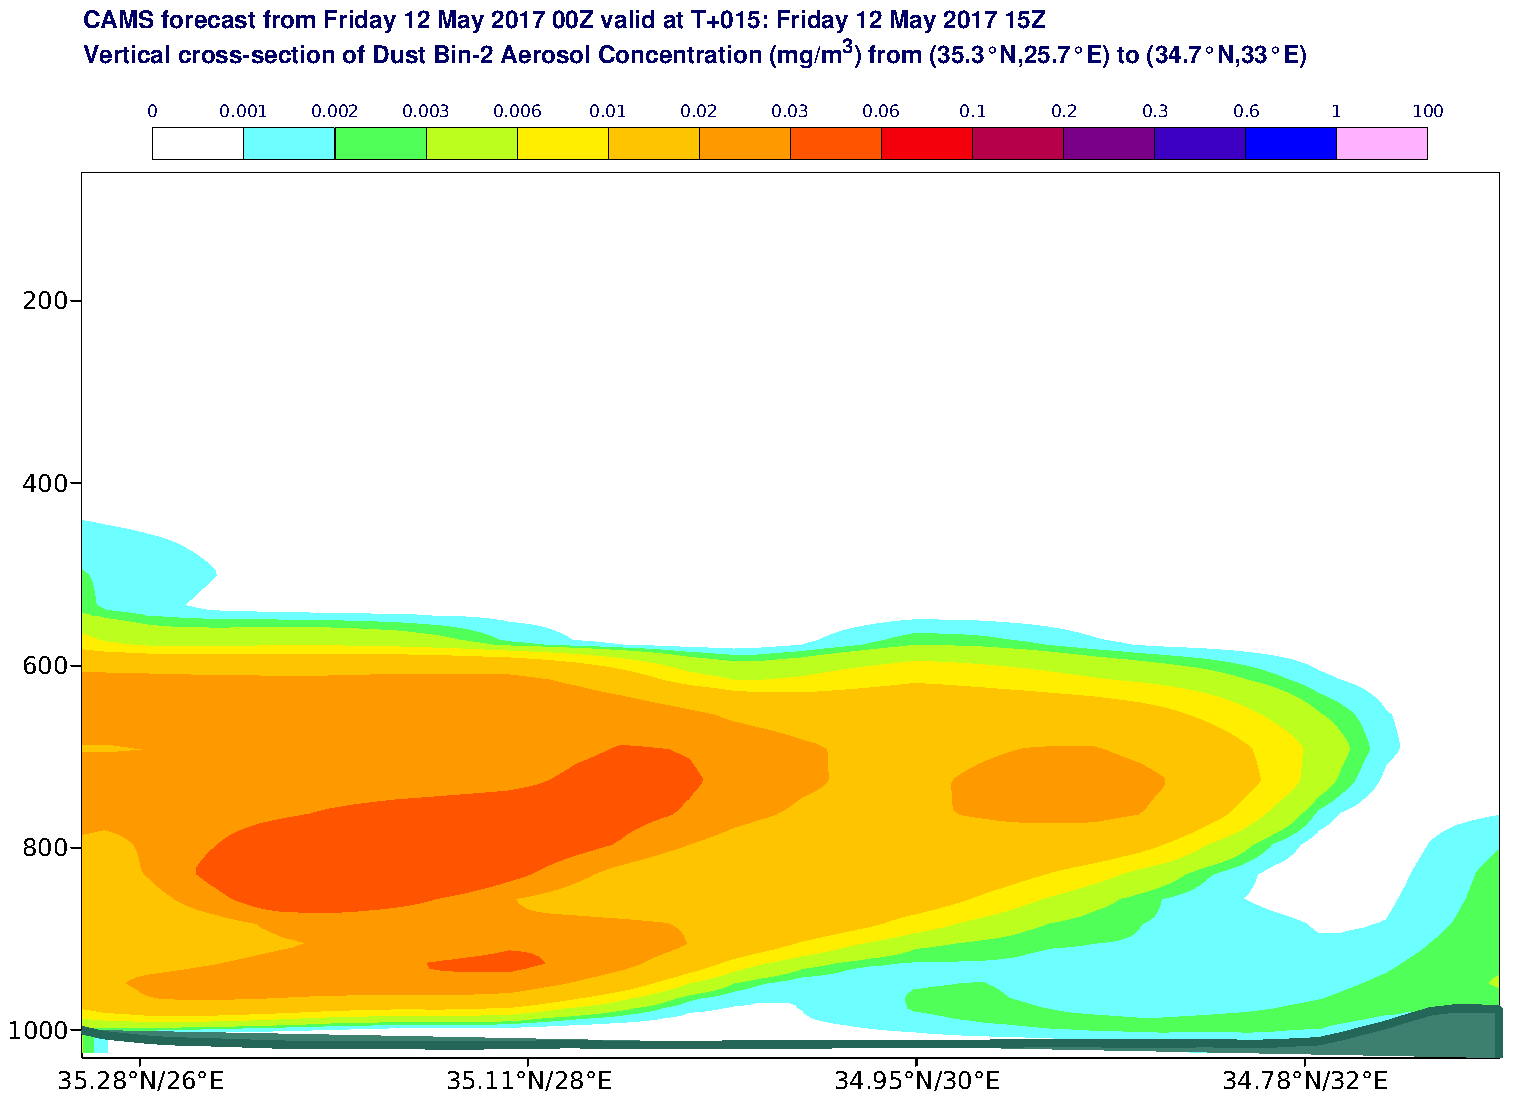 Vertical cross-section of Dust Bin-2 Aerosol Concentration (mg/m3) valid at T15 - 2017-05-12 15:00